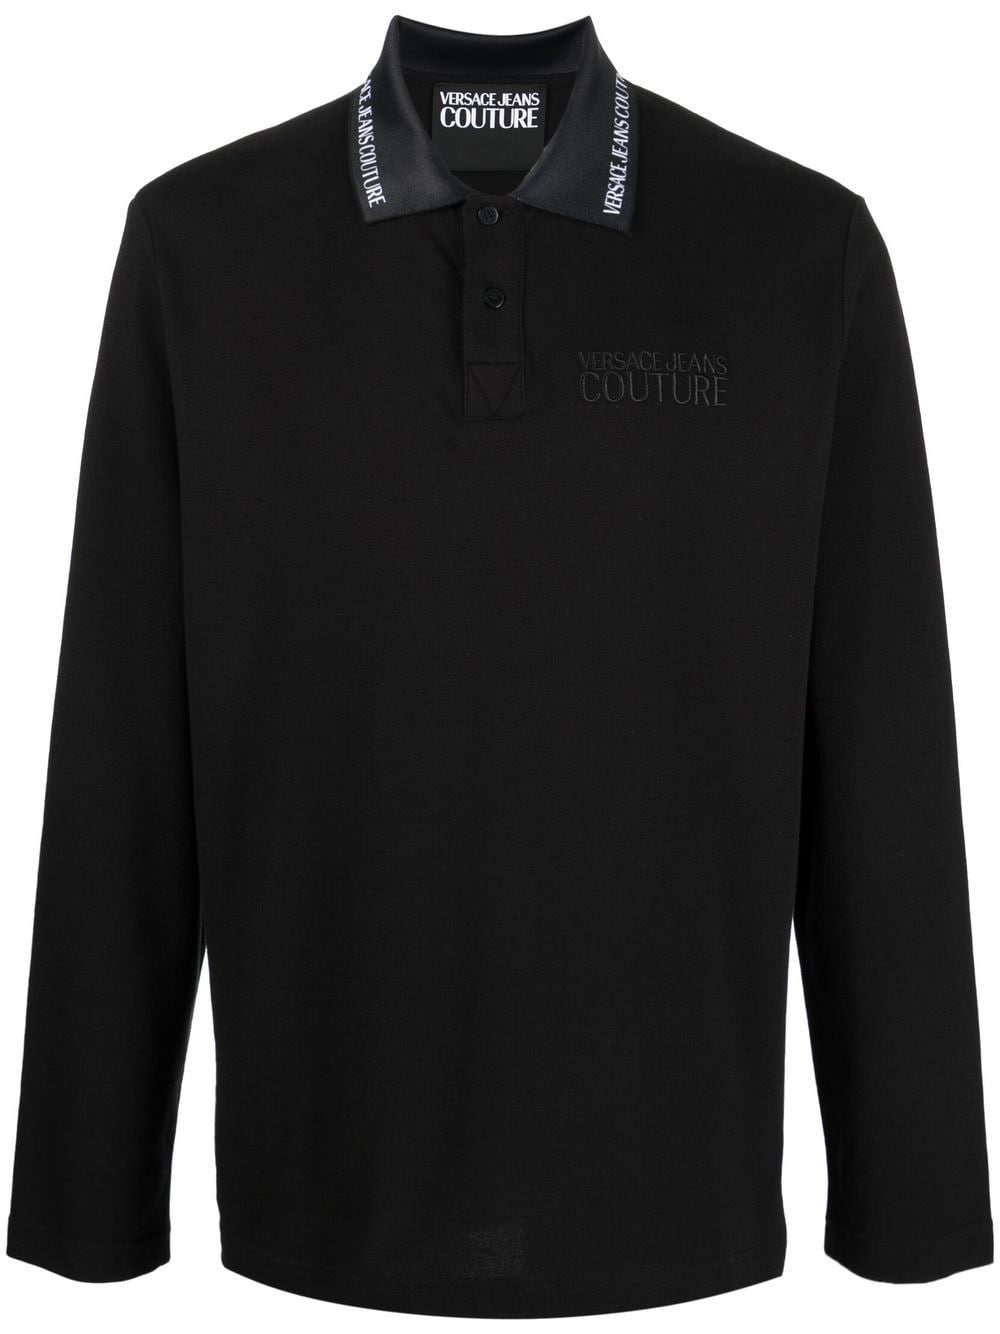 Versace Jeans Couture logo embroidered polo shirt - Black von Versace Jeans Couture